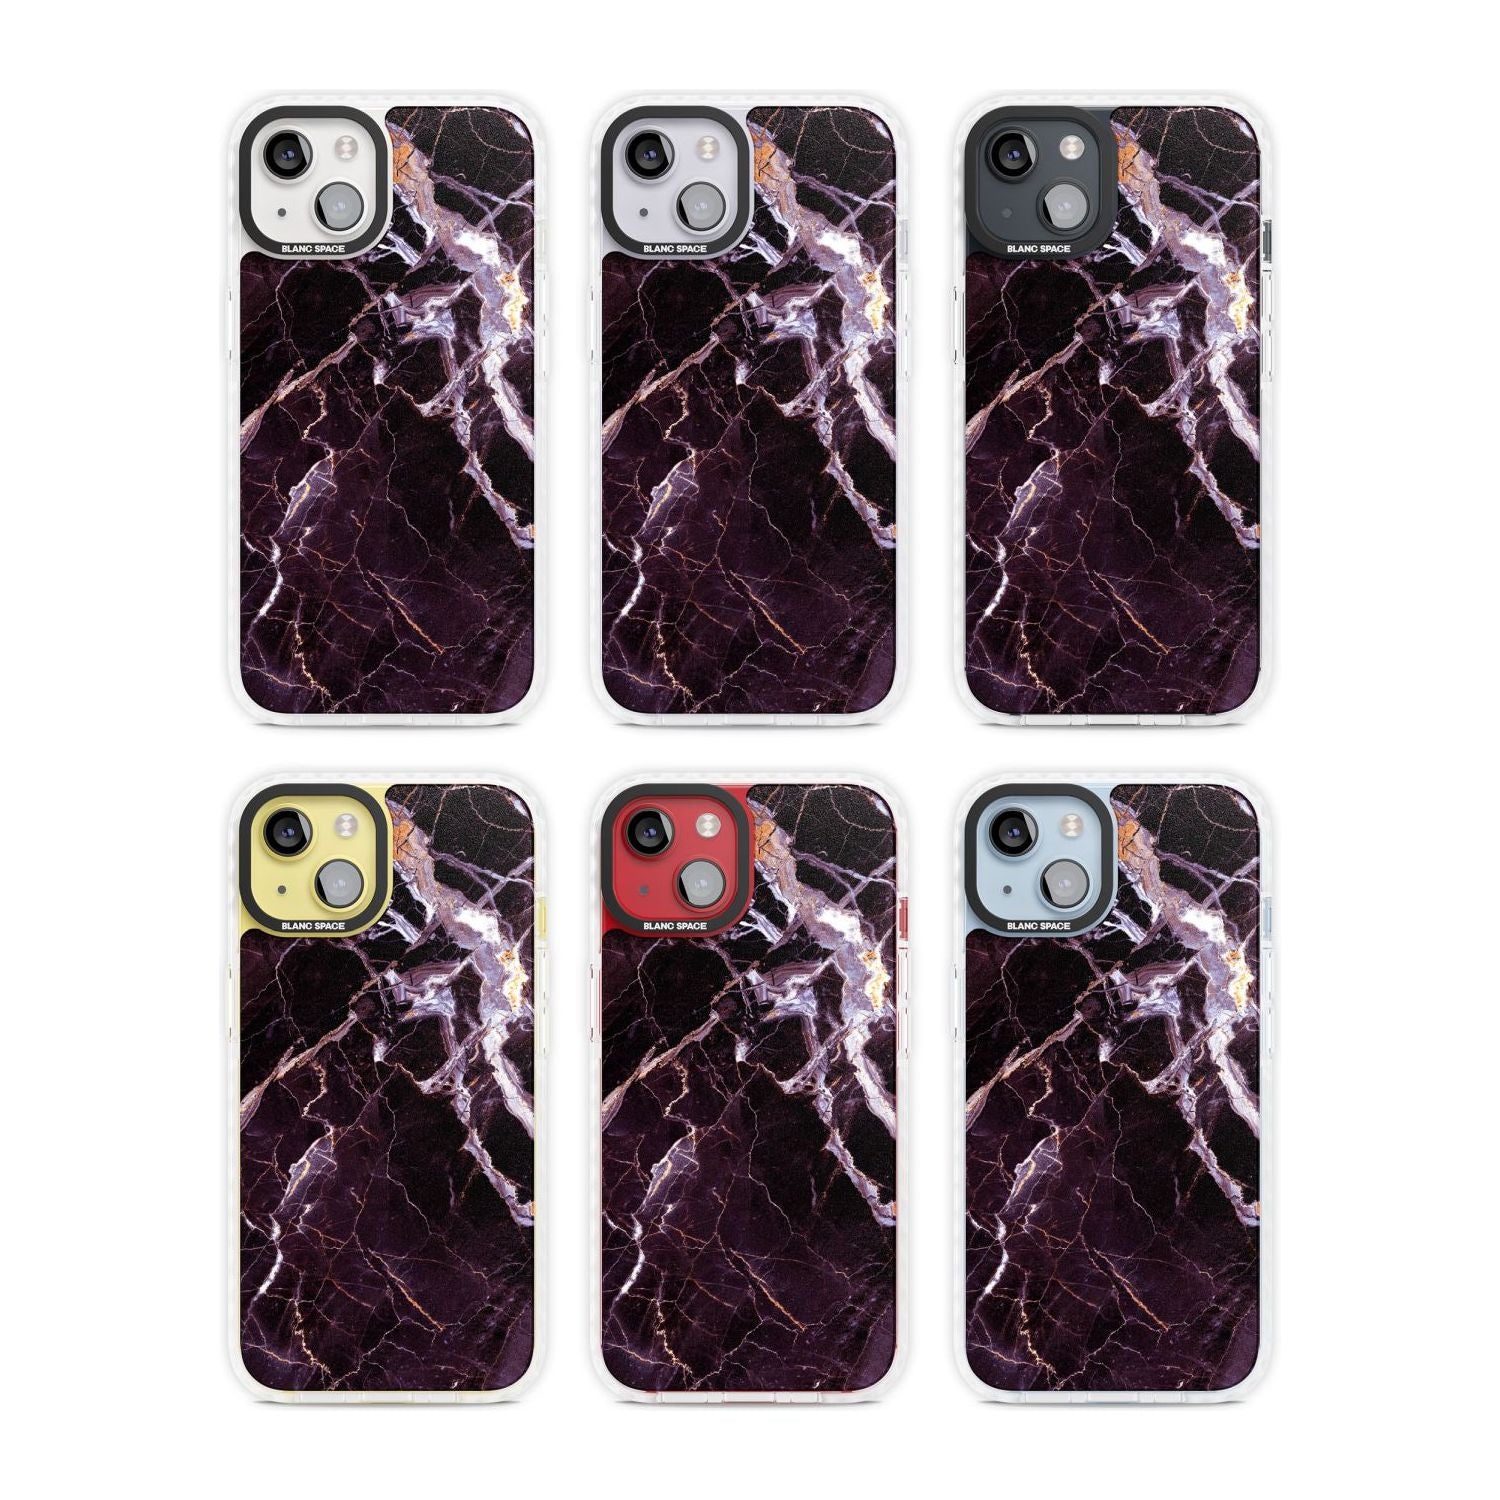 Black, Purple & Yellow shattered Marble Phone Case iPhone 15 Pro Max / Black Impact Case,iPhone 15 Plus / Black Impact Case,iPhone 15 Pro / Black Impact Case,iPhone 15 / Black Impact Case,iPhone 15 Pro Max / Impact Case,iPhone 15 Plus / Impact Case,iPhone 15 Pro / Impact Case,iPhone 15 / Impact Case,iPhone 15 Pro Max / Magsafe Black Impact Case,iPhone 15 Plus / Magsafe Black Impact Case,iPhone 15 Pro / Magsafe Black Impact Case,iPhone 15 / Magsafe Black Impact Case,iPhone 14 Pro Max / Black Impact Case,iPho